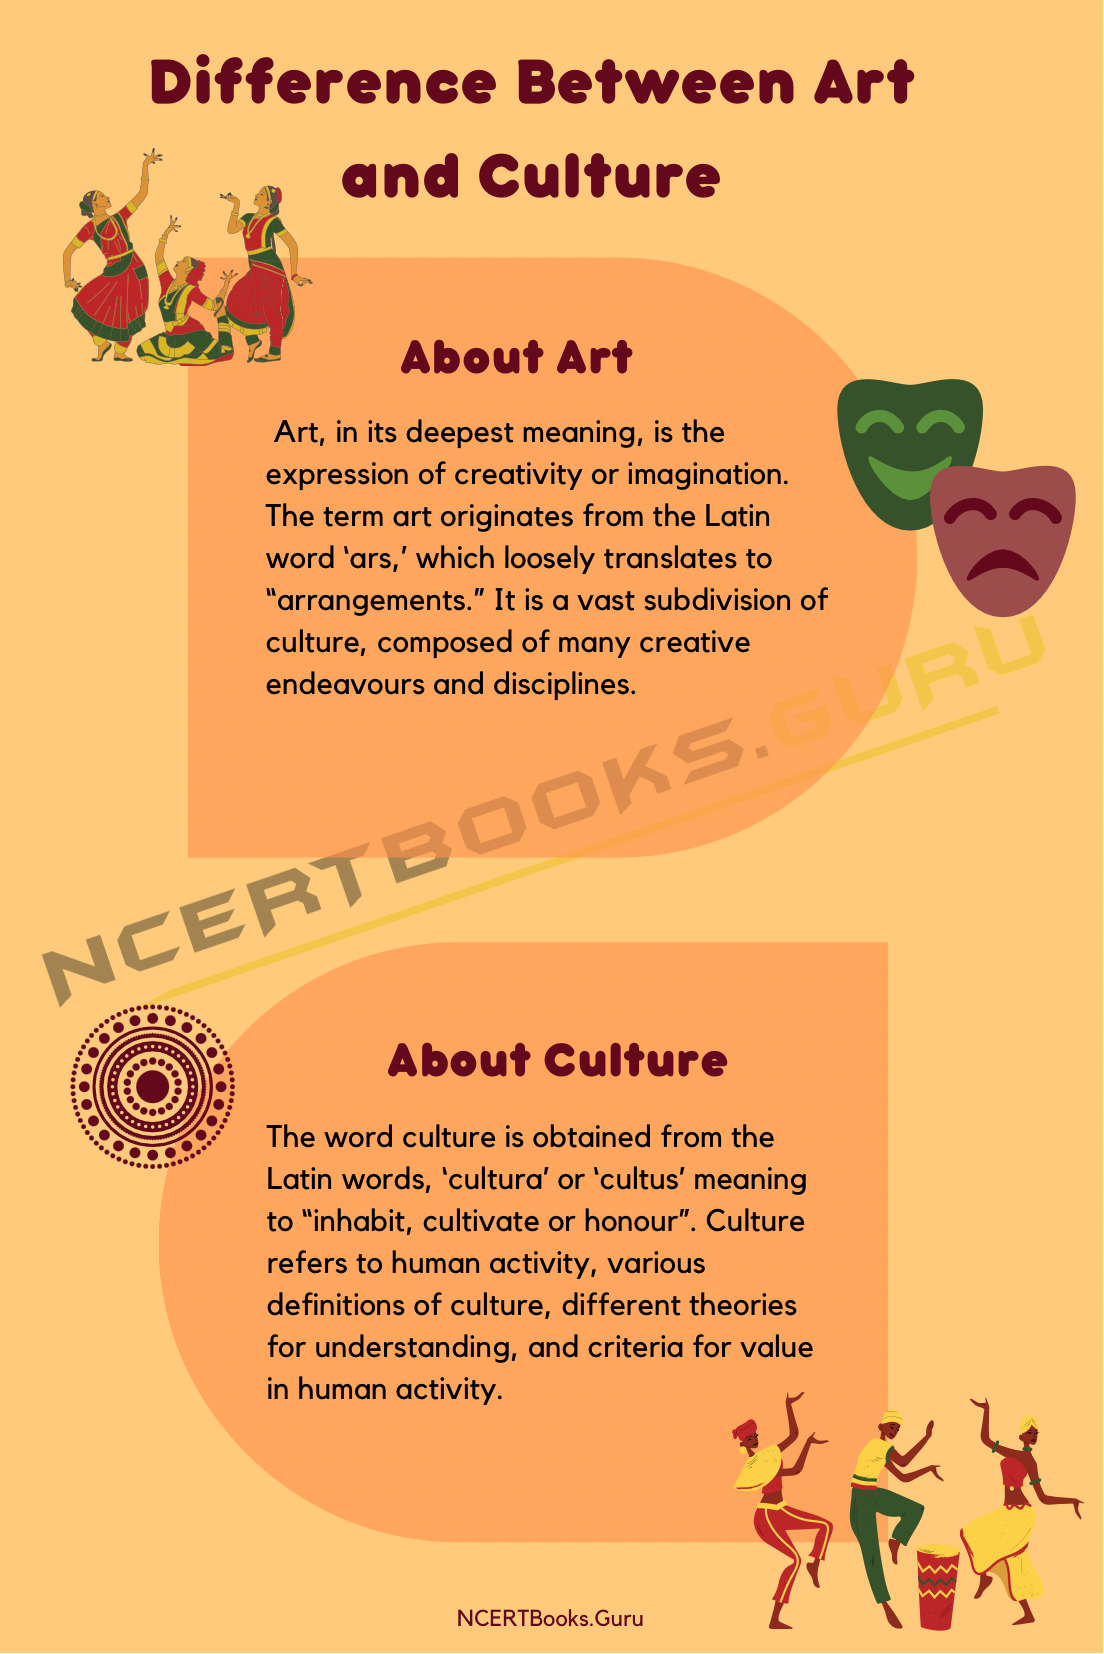 What is the definition of art and Culture?